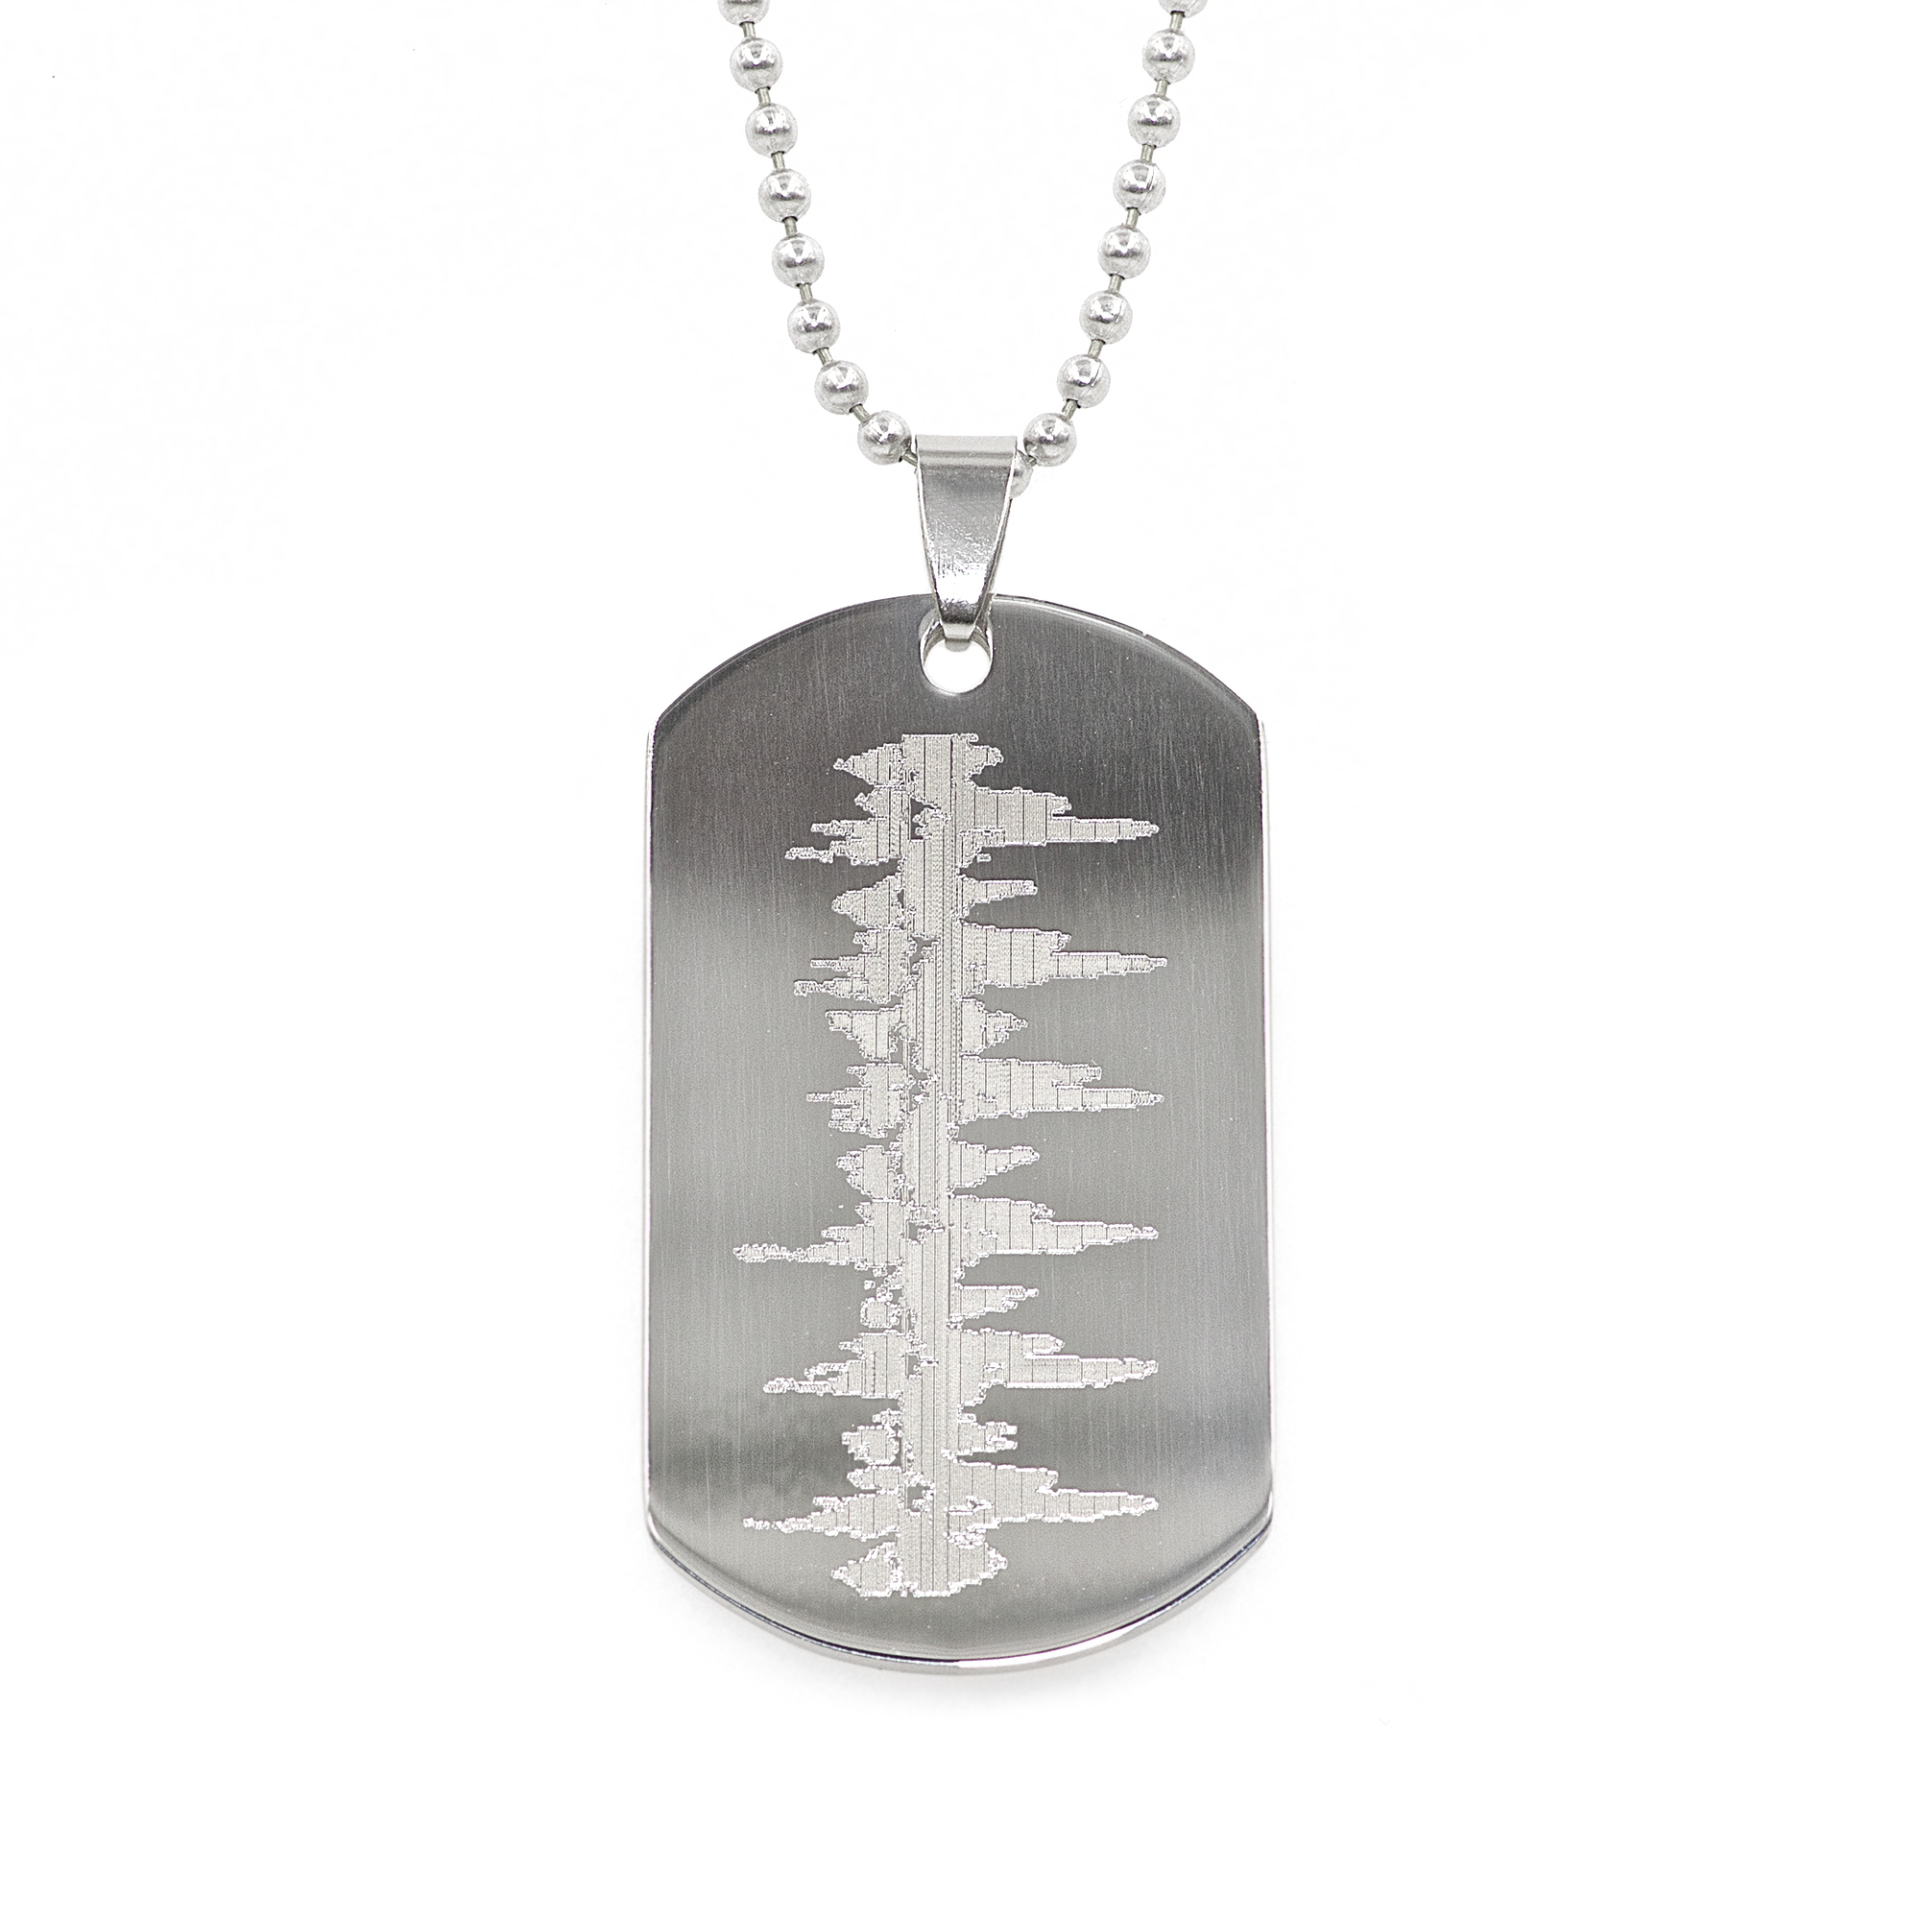 Heartbeat Dog Tag Necklace in stainless steel